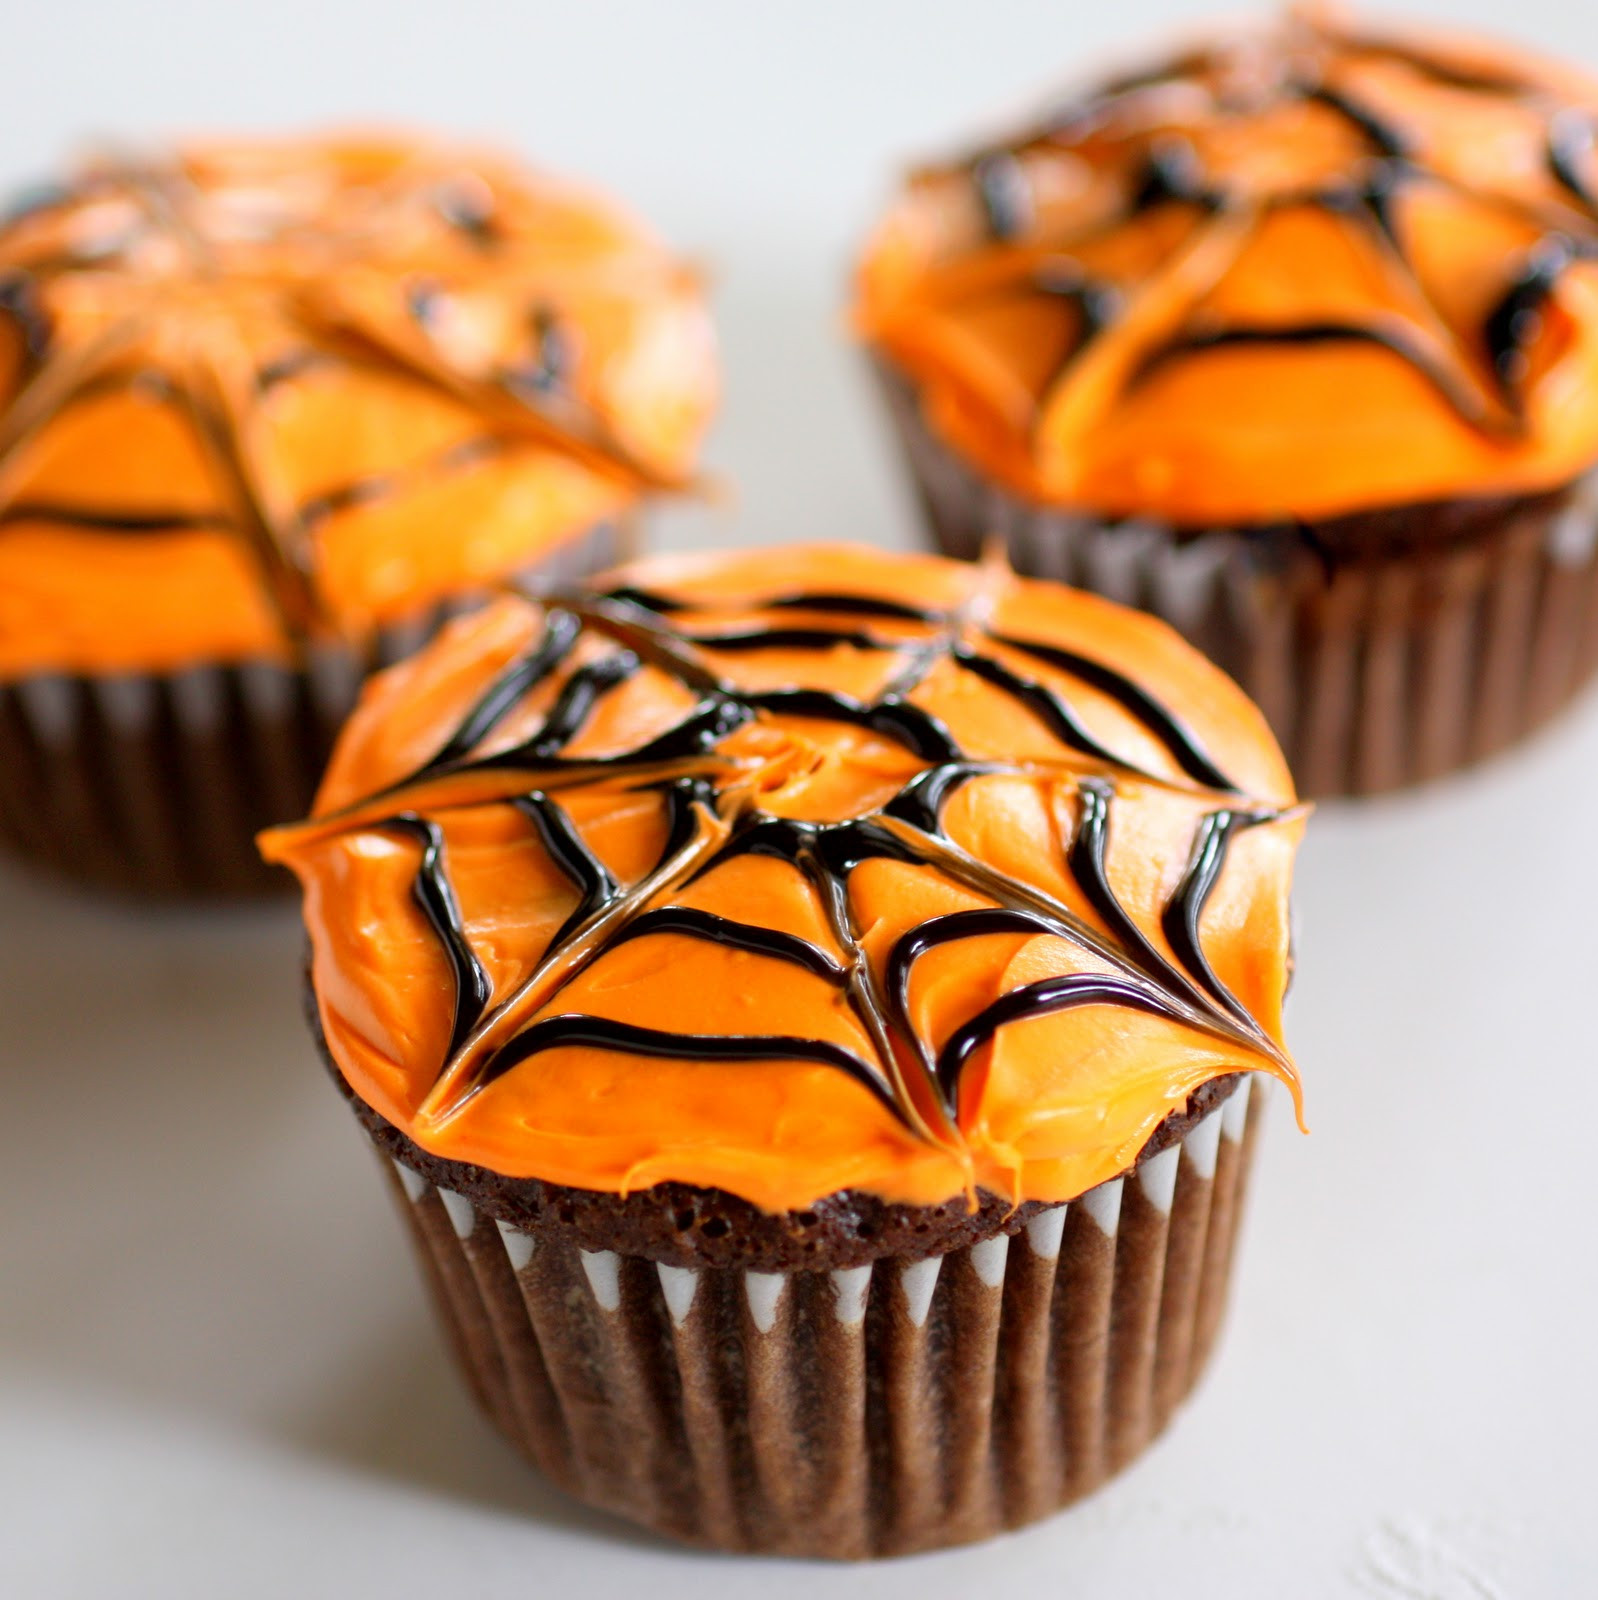 Homemade Halloween Cupcakes
 Spiderweb Cupcakes The Girl Who Ate Everything